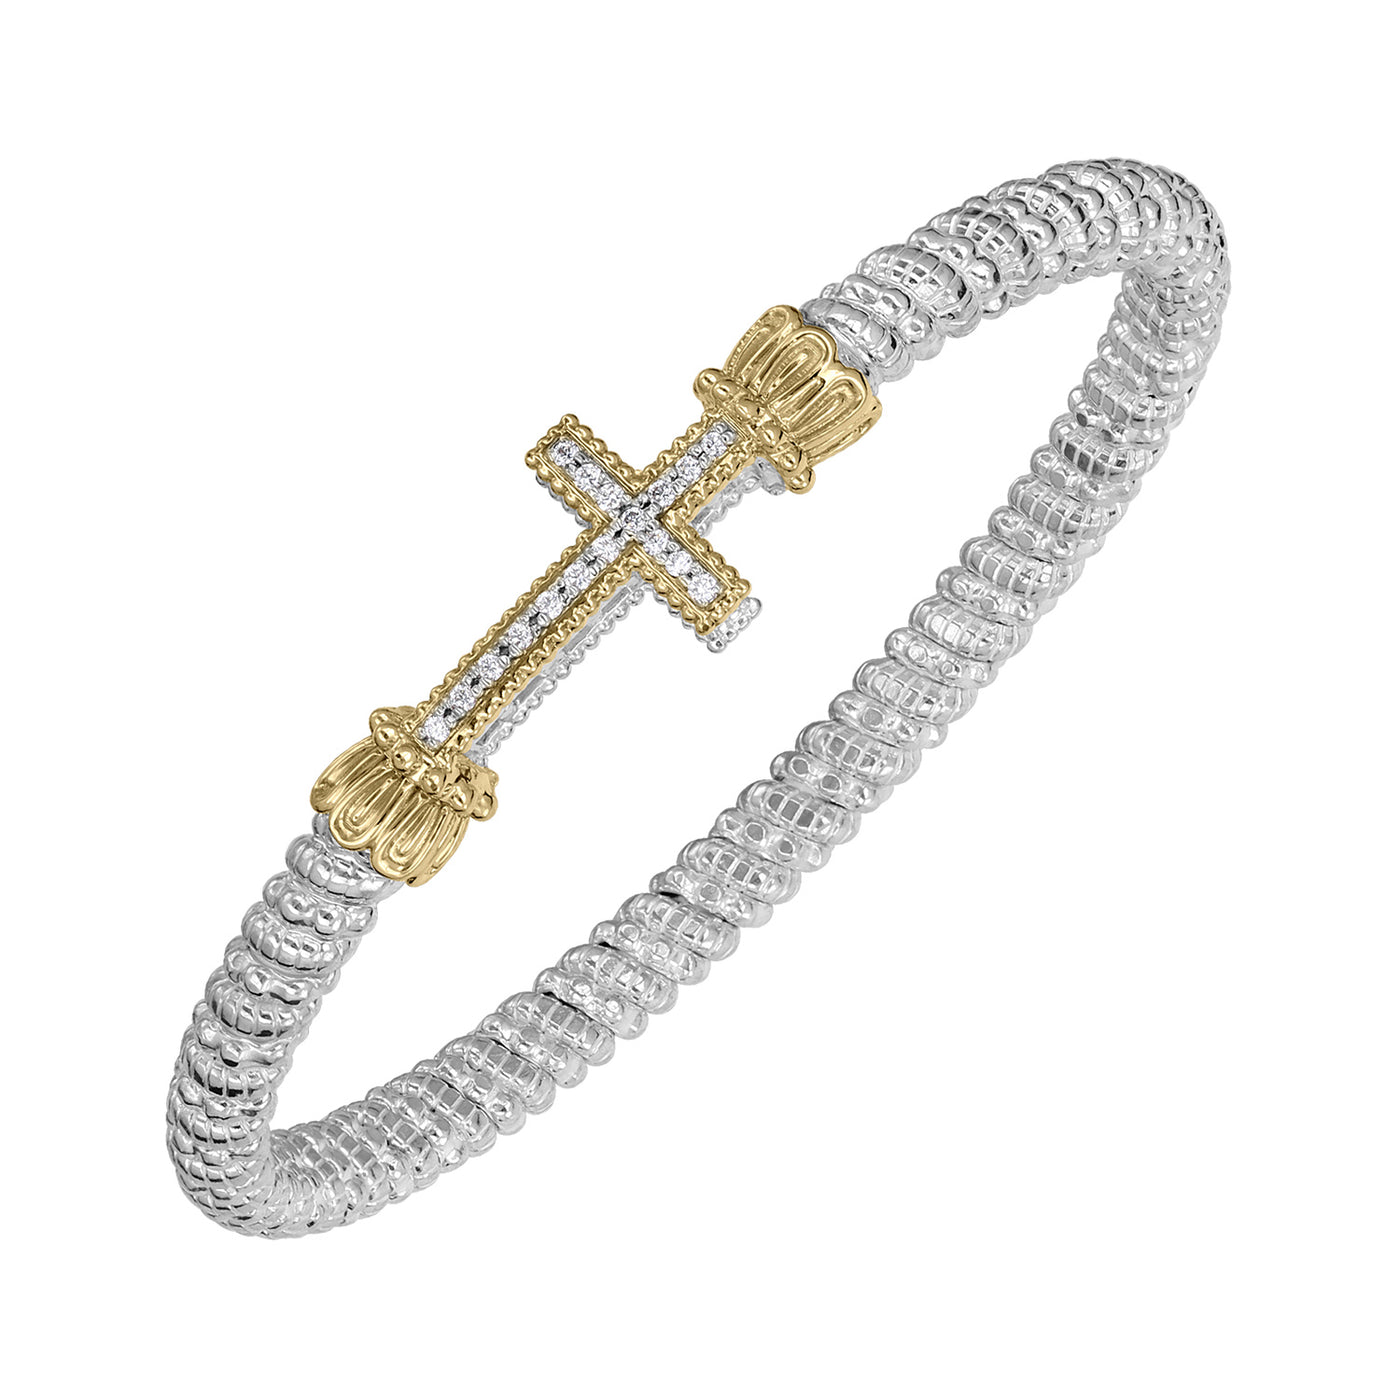 Vahan Sterling Silver and 14k Yellow Gold Moiré Beaded® Bangle Bracelet with Diamonds – 23499D04